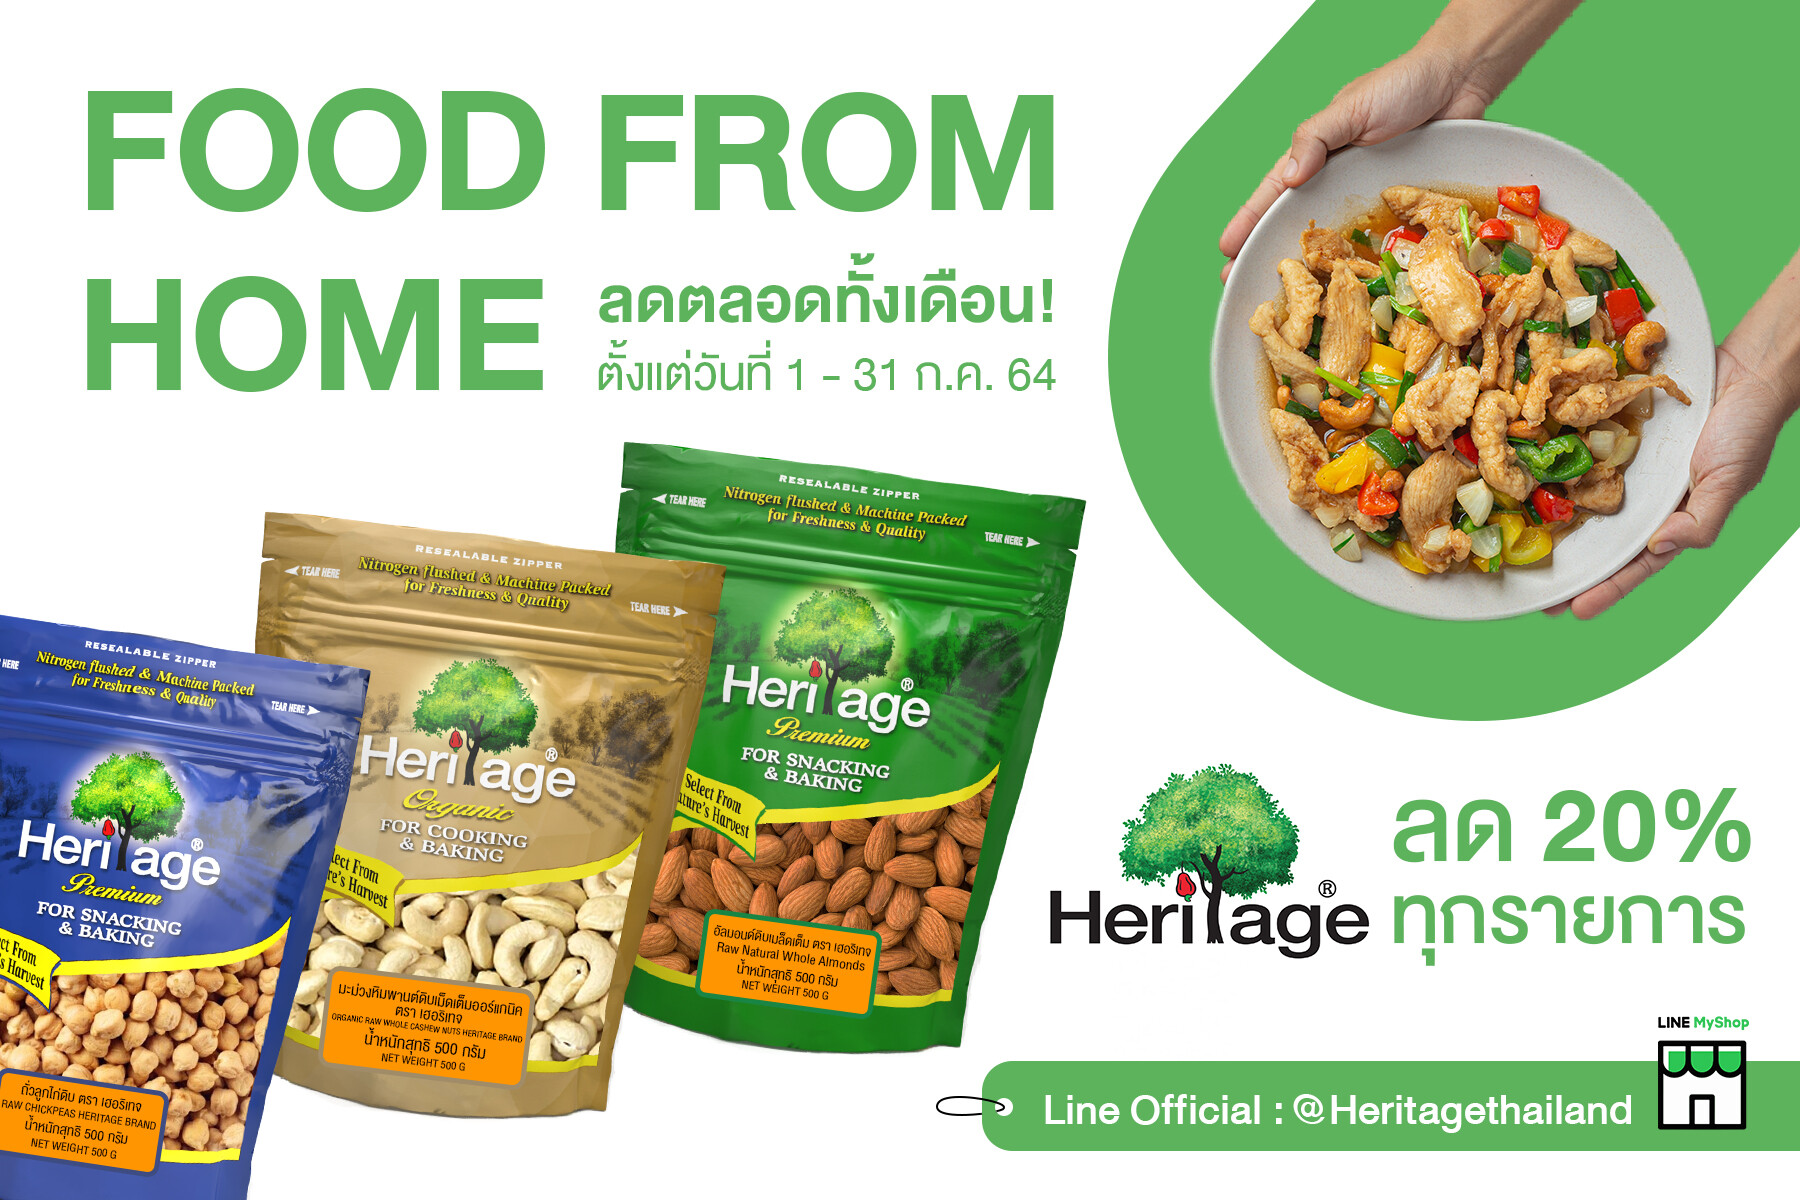 Heritage Offers "Food from Home" Promotion with 20% Discount on all items!